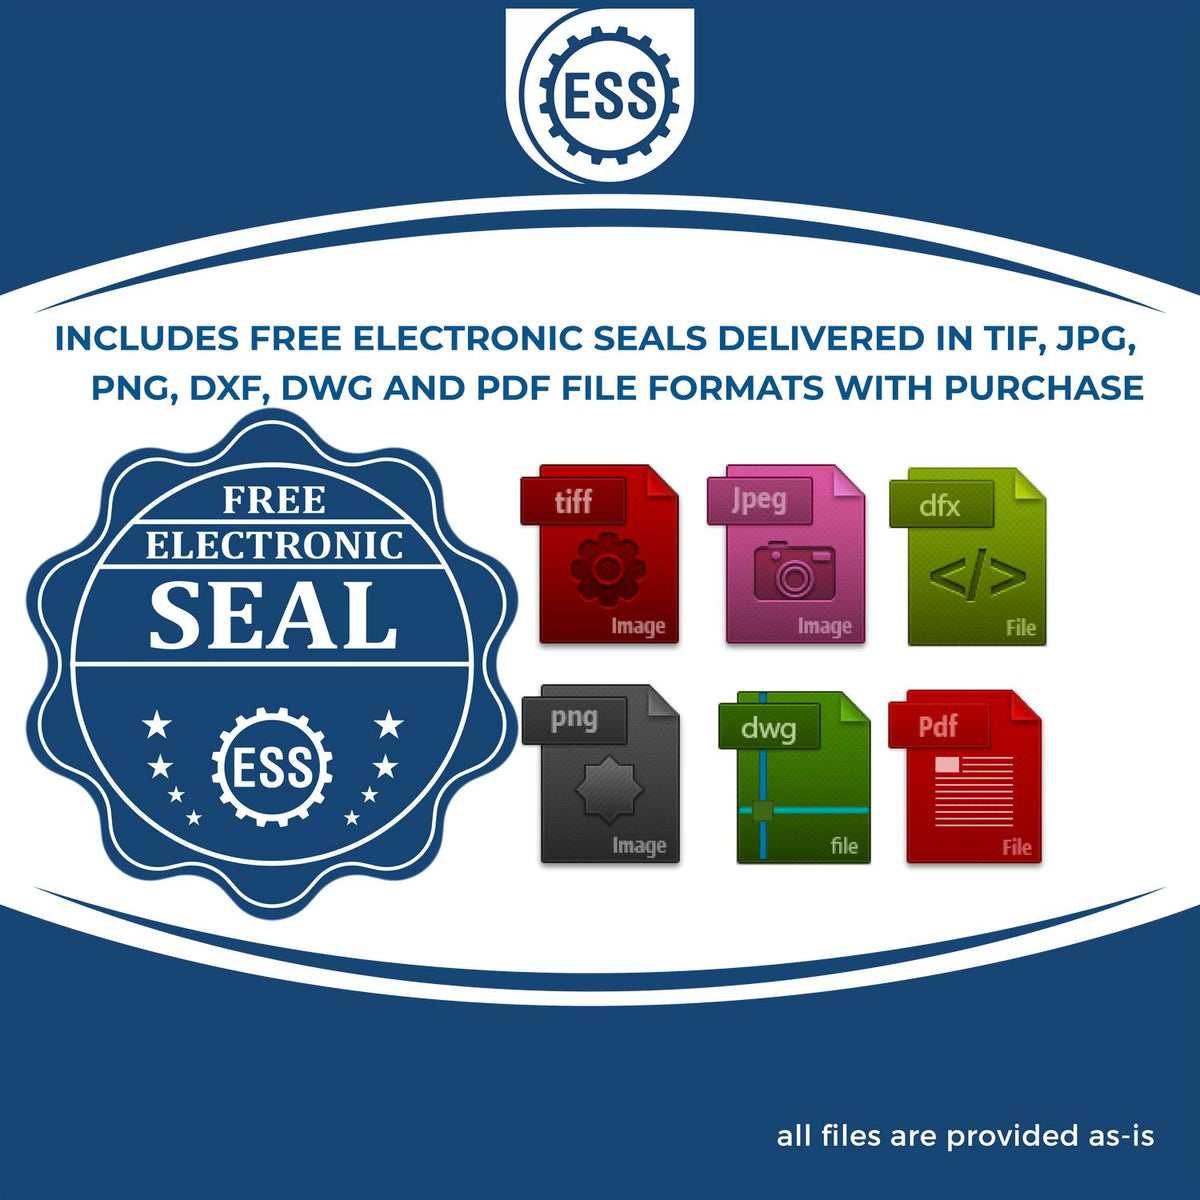 An infographic for the free electronic seal for the Slim Pre-Inked Michigan Land Surveyor Seal Stamp illustrating the different file type icons such as DXF, DWG, TIF, JPG and PNG.